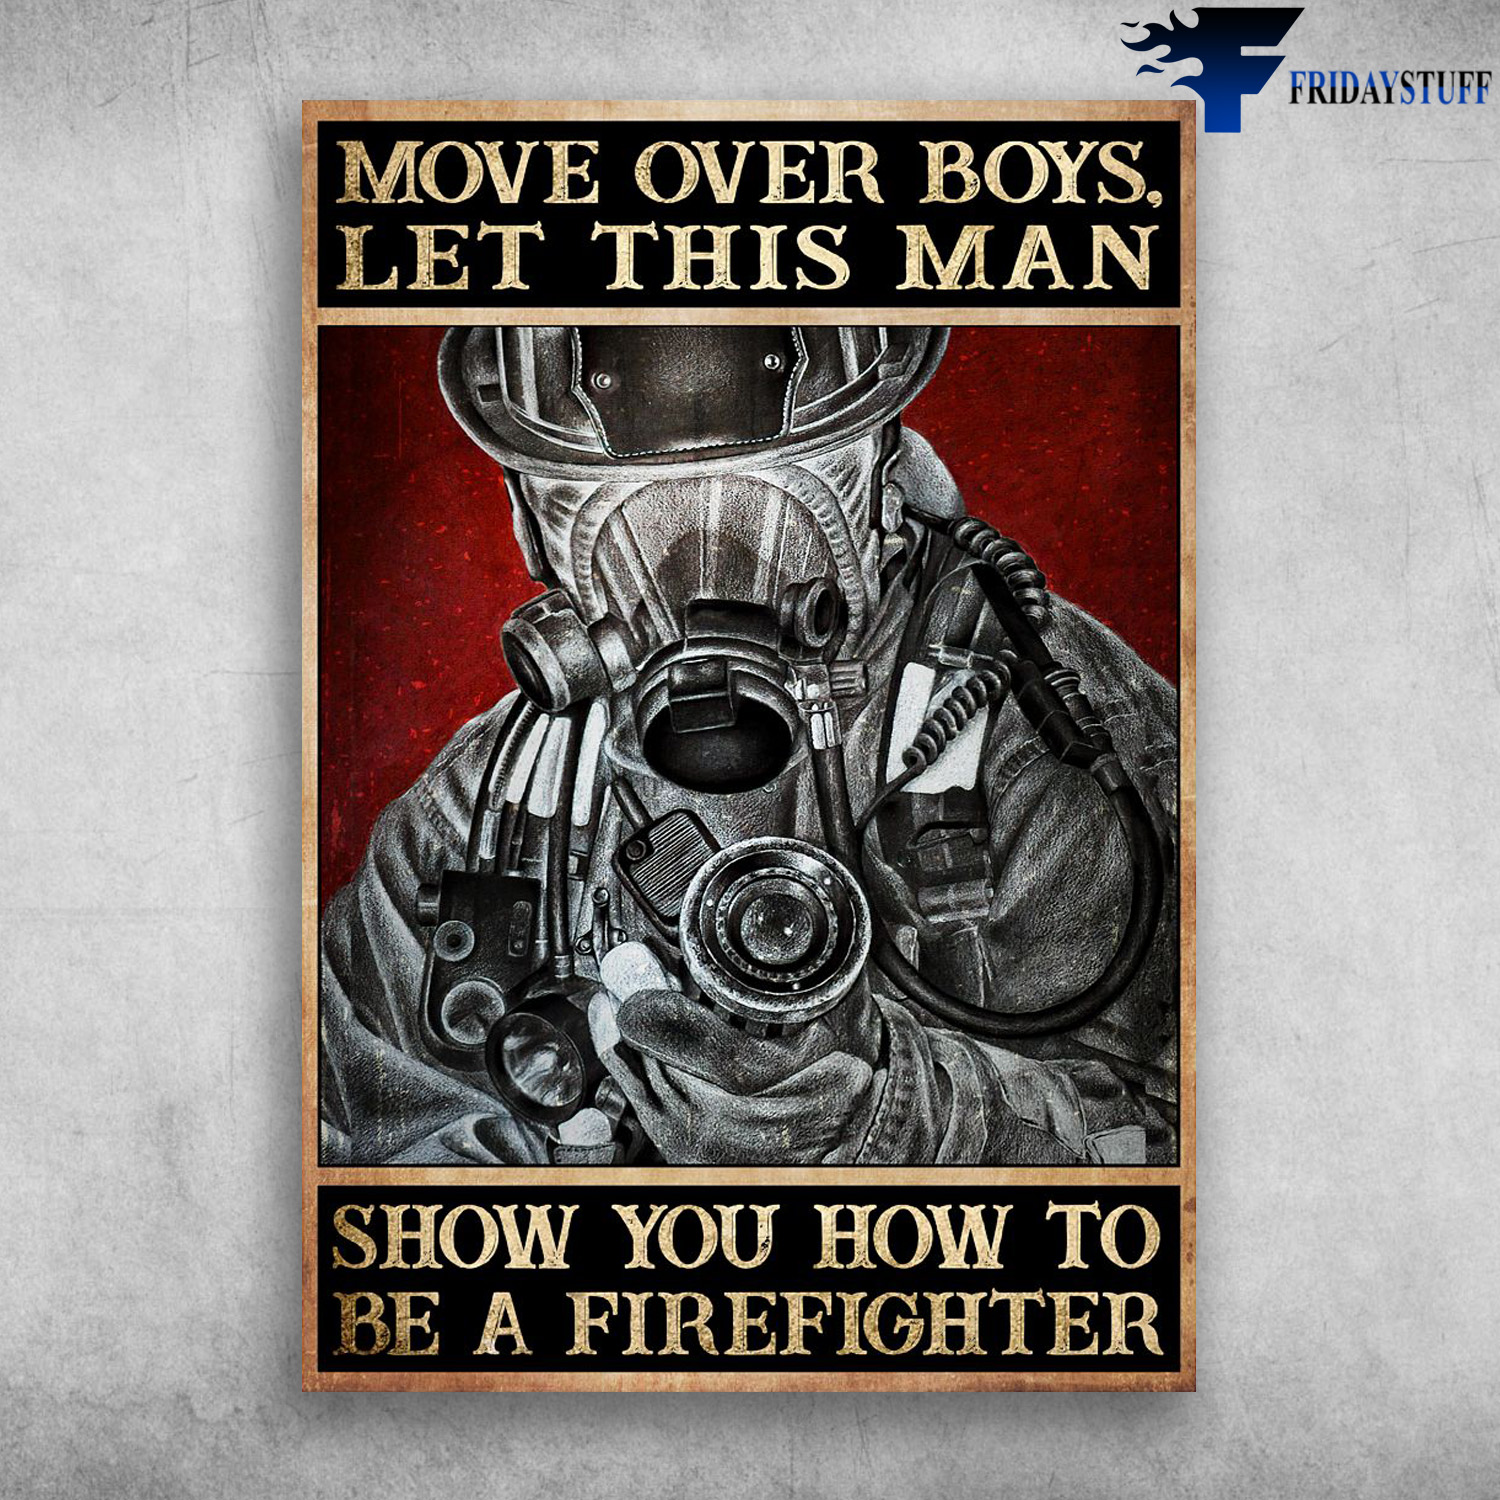 Firefighter Man - Move Over Boys, Let This Man Show You, How To Be A Firefighter